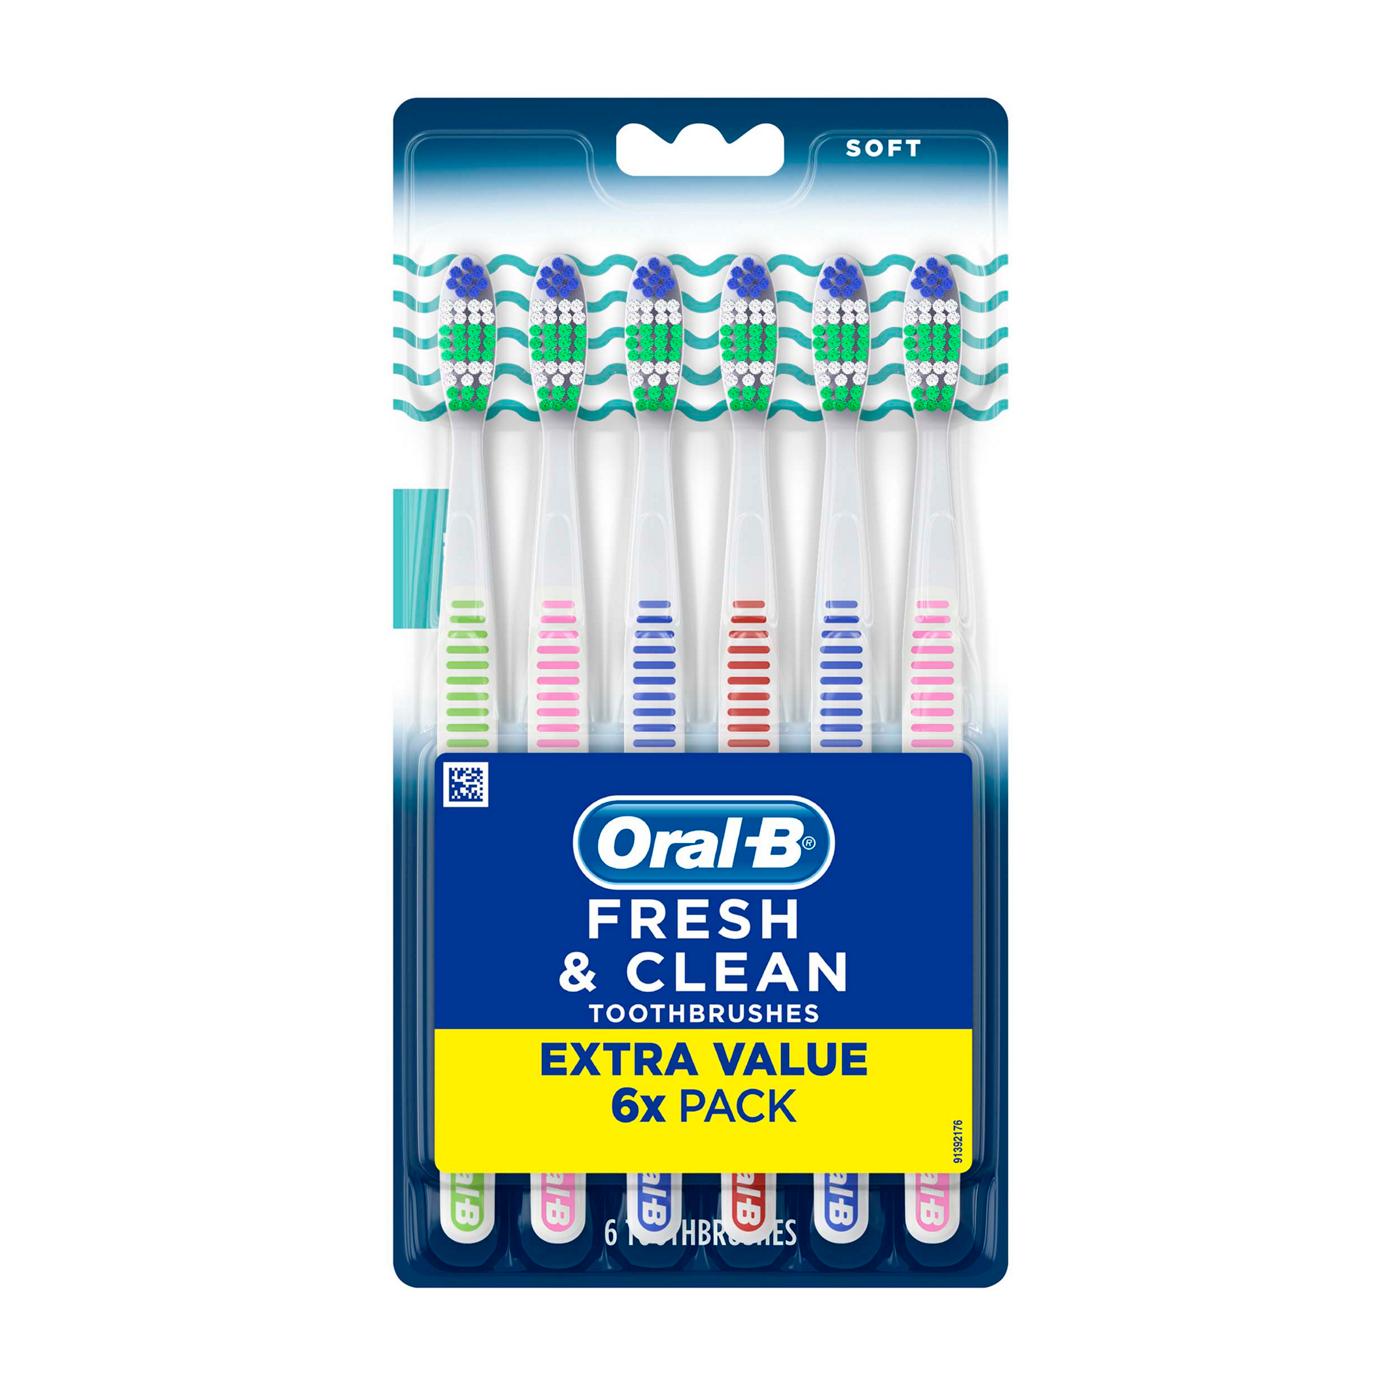 Oral-B Fresh & Clean Toothbrushes - Soft; image 1 of 6